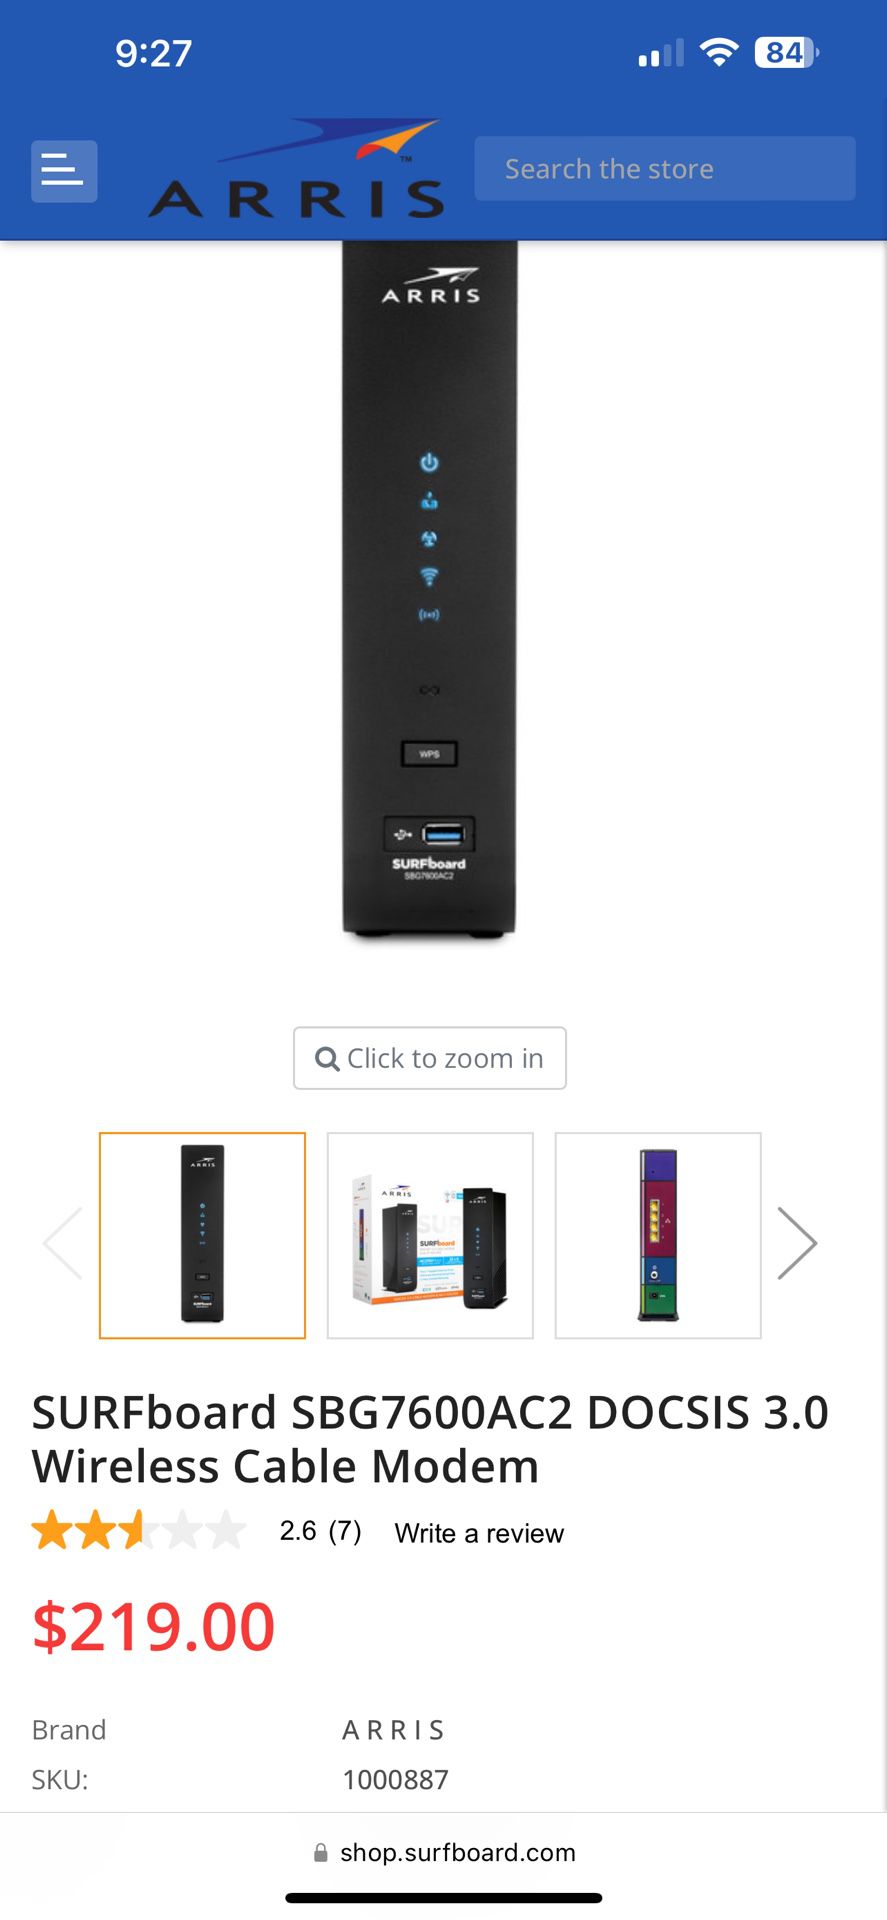 SURFboard SBG7600AC2 DOCSIS 3.0 Wireless Cable Modem  